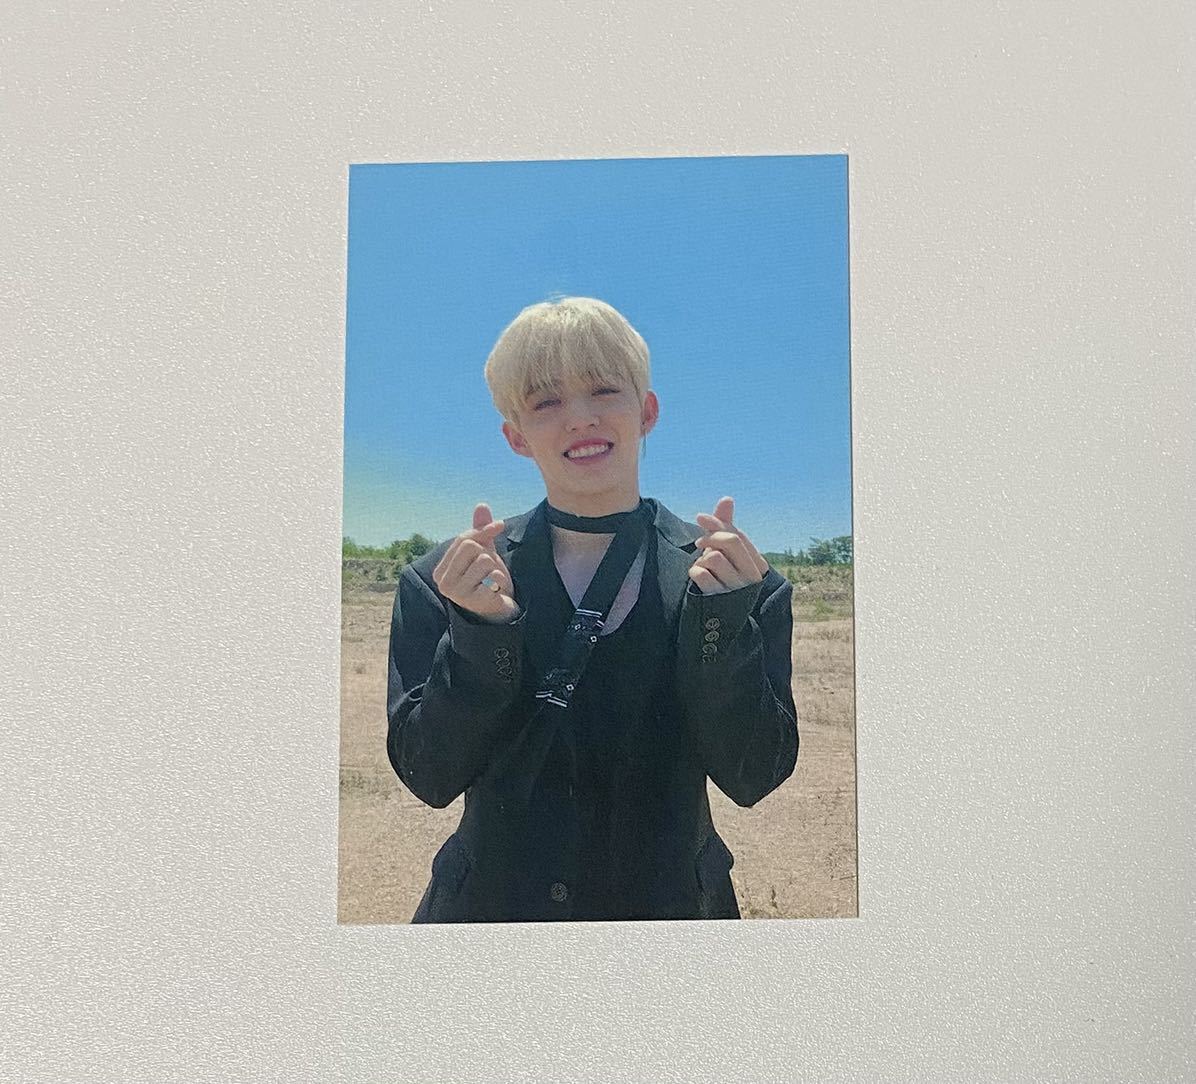 SEVENTEENeskpsOde to You in Seoul carat zone 4 period soul navy blue trading card S.COUPS Photocard